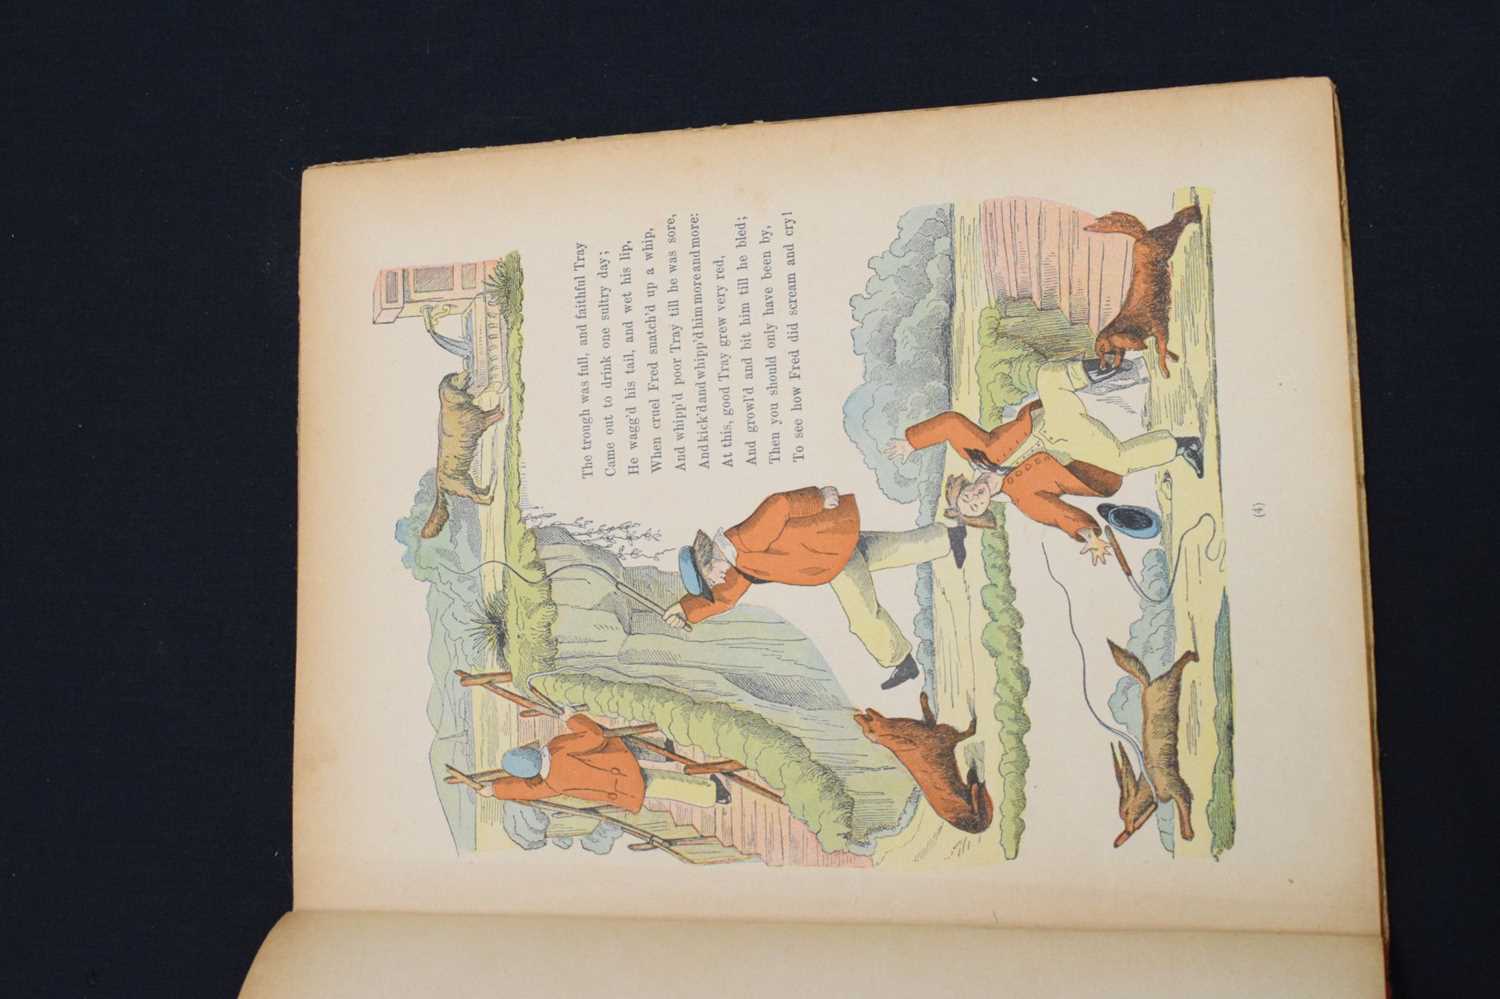 'Der Struwwelpeter' by Dr Heinrich Hoffman, German and English editions - Image 12 of 12